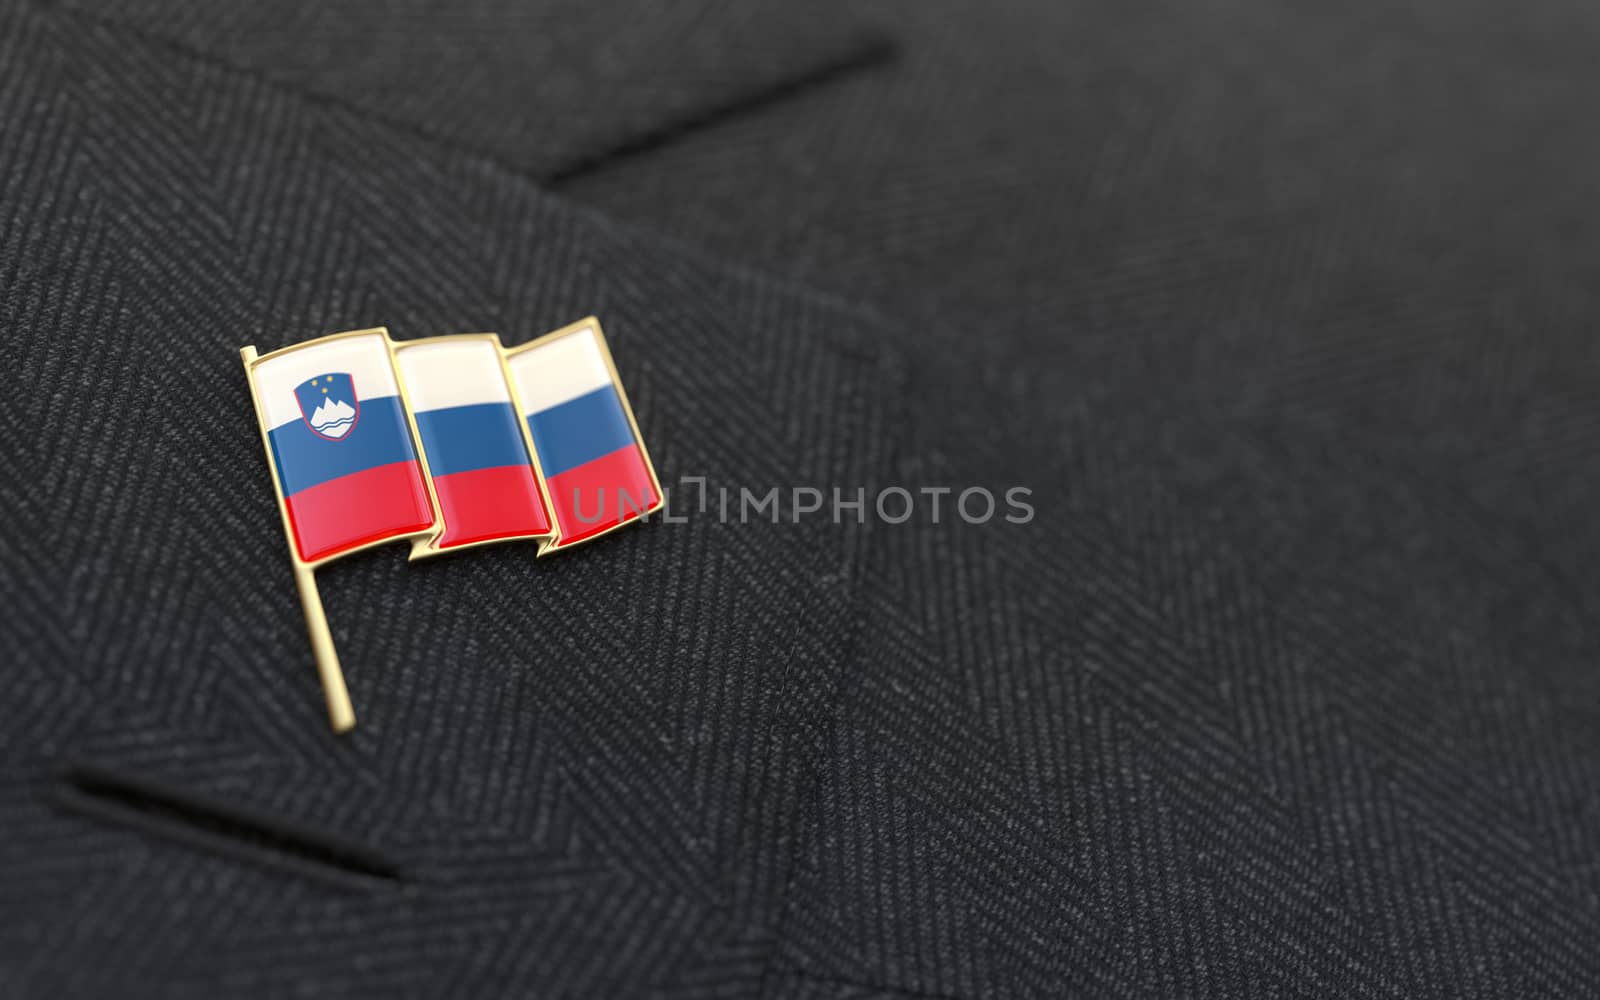 Slovenia flag lapel pin on the collar of a business suit jacket shows patriotism